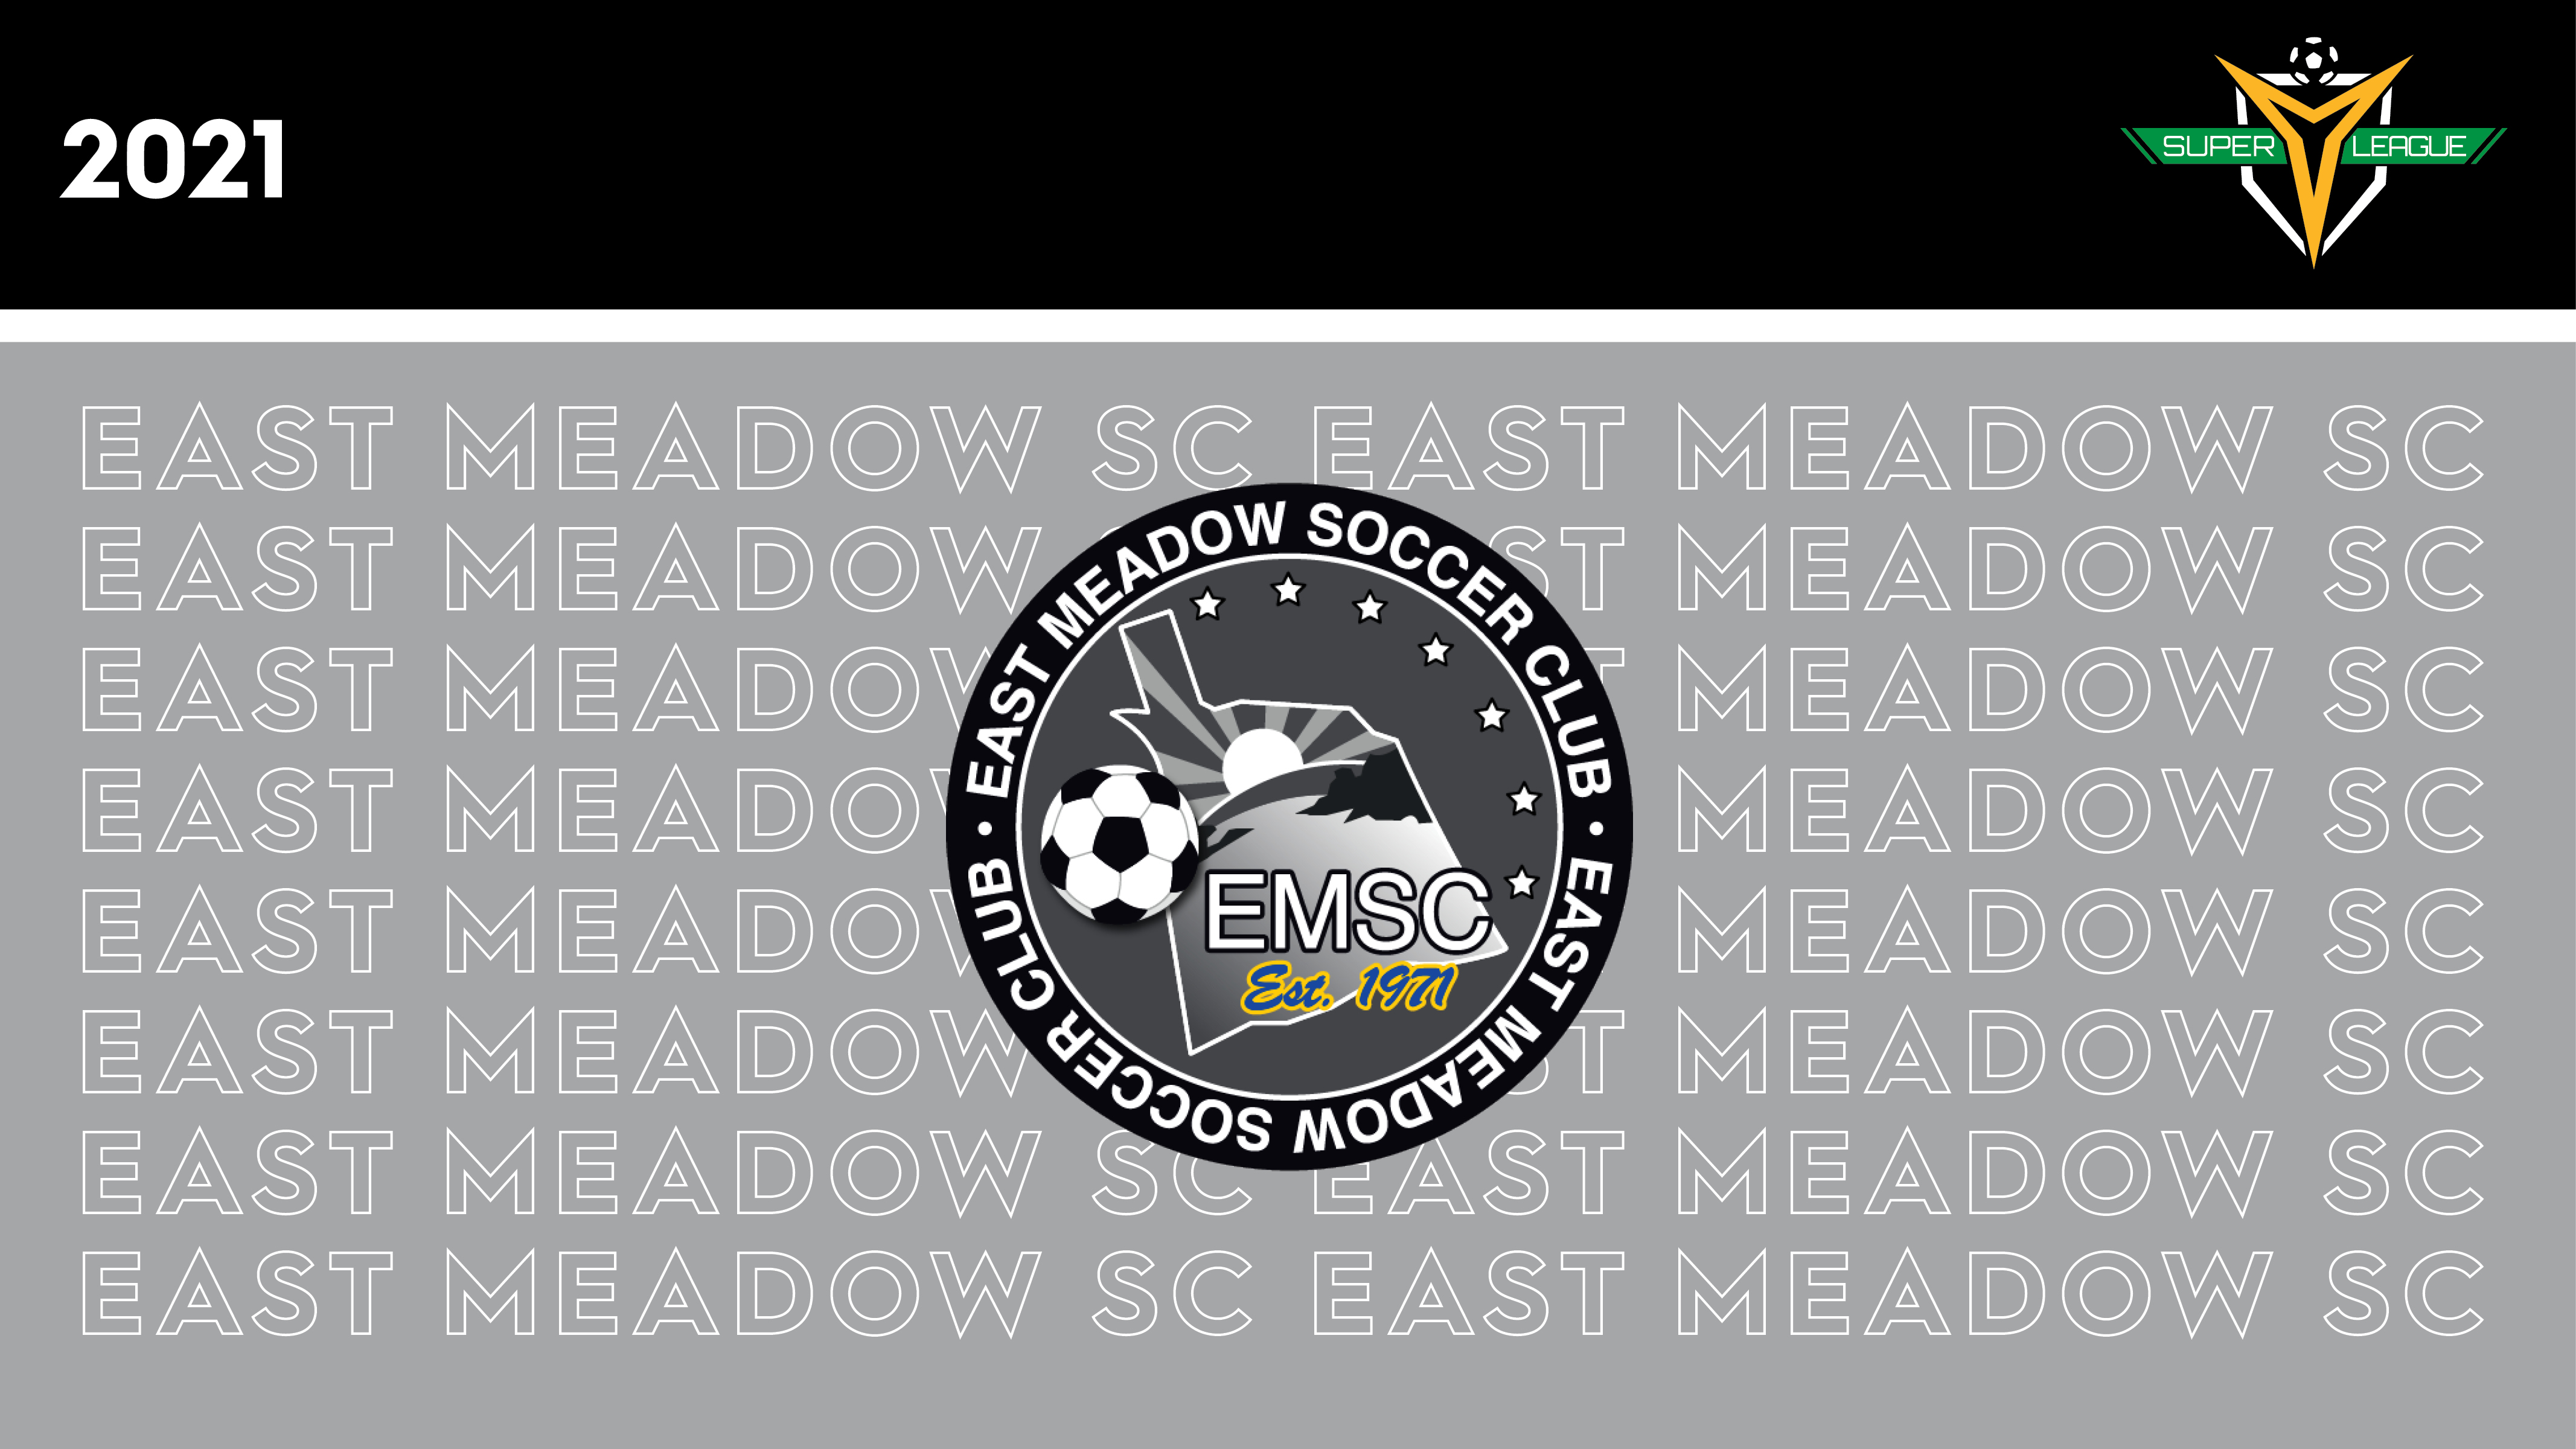 East Meadow SC Joins the Super Y League for the 2021 Season